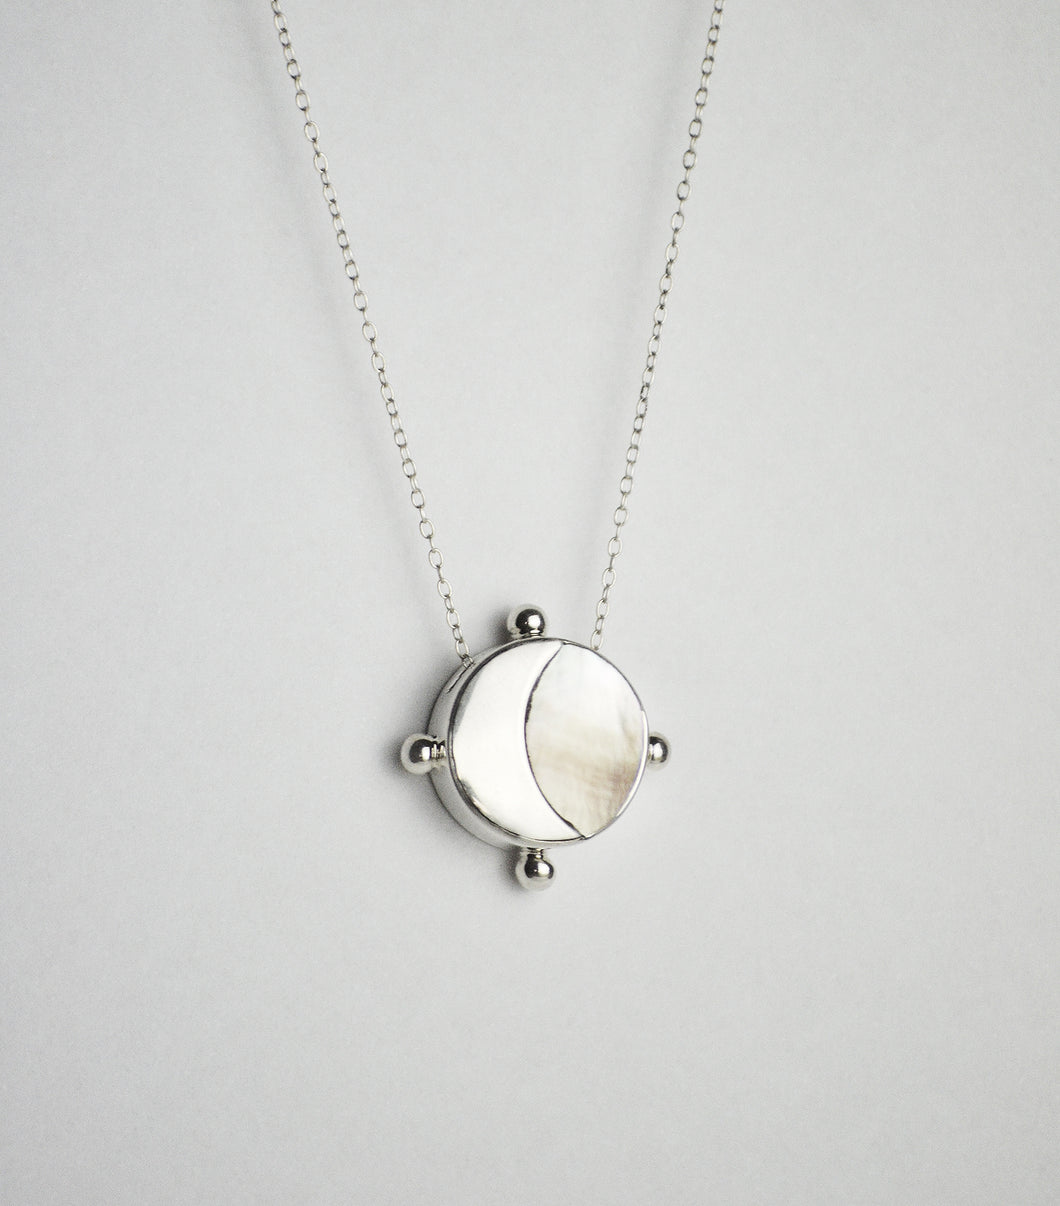 The Crescent Moon Mother of Pearl Necklace